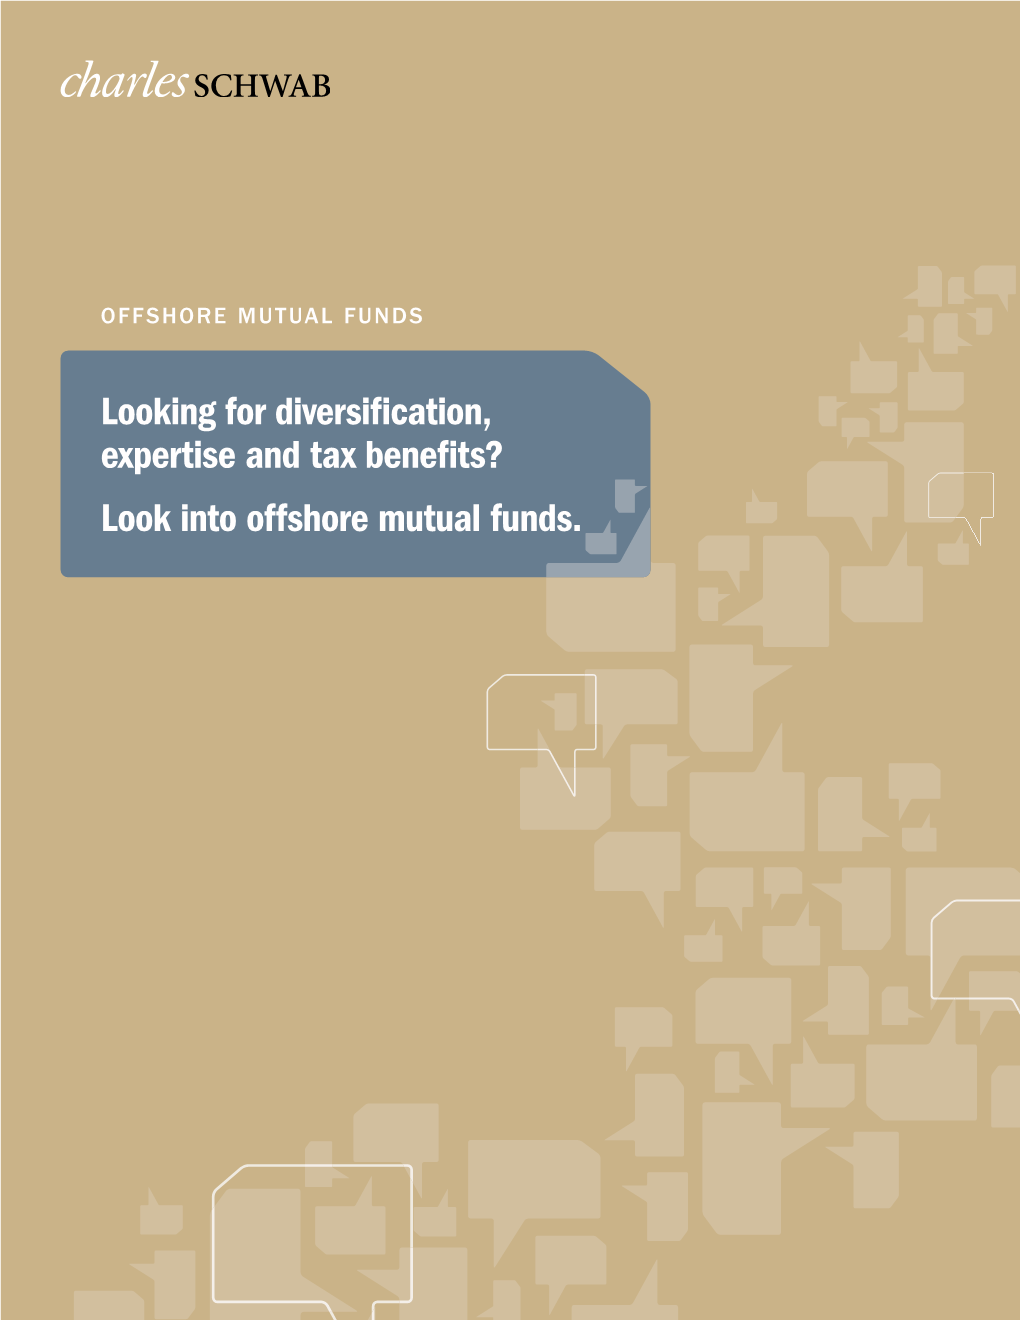 Looking for Diversification, Expertise and Tax Benefits? Look Into Offshore Mutual Funds